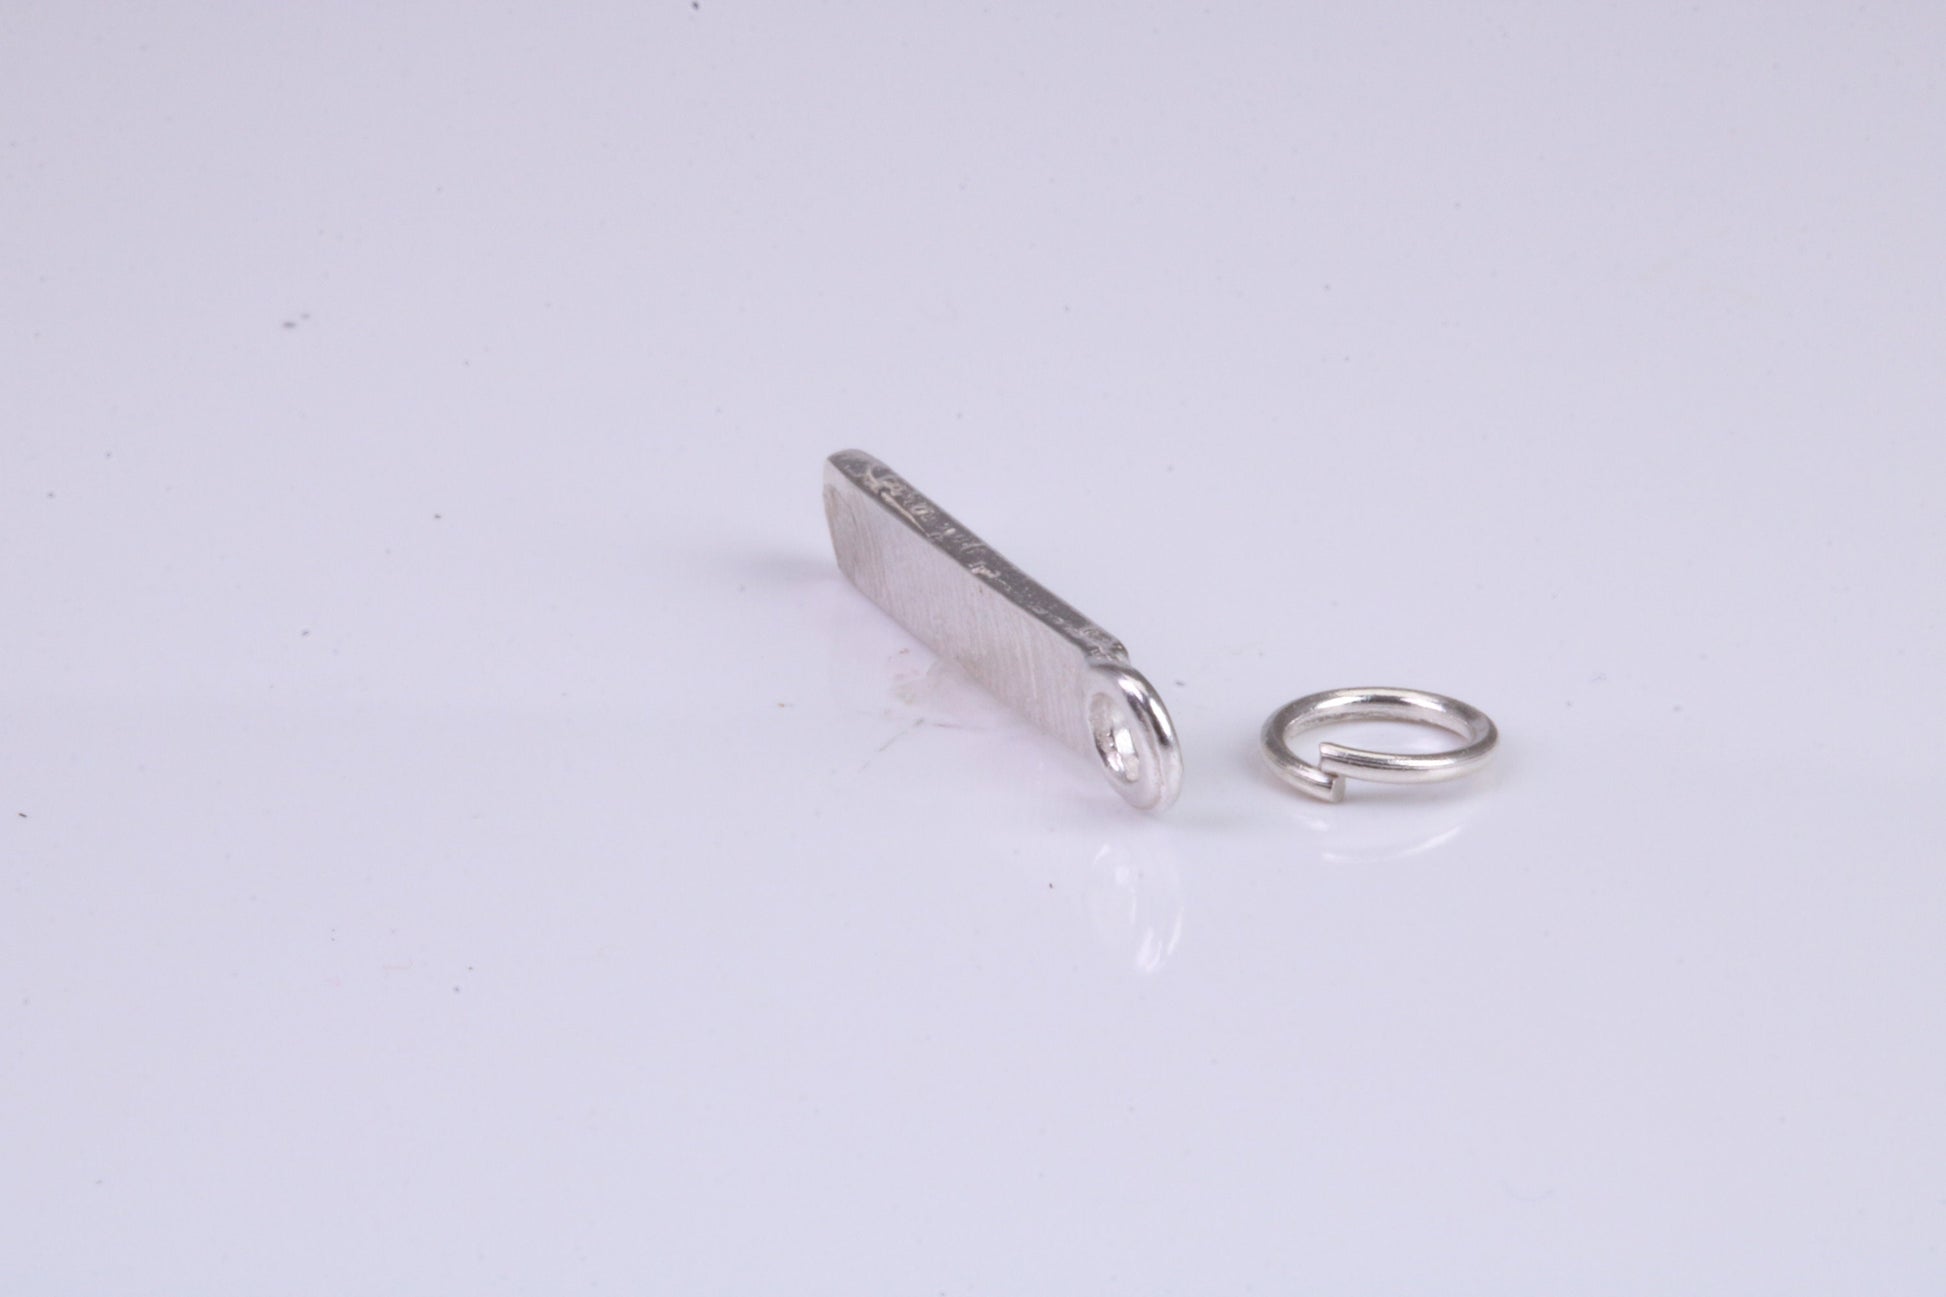 Butter Charm, Traditional Charm, Made from Solid 925 Grade Sterling Silver, Complete with Attachment Link